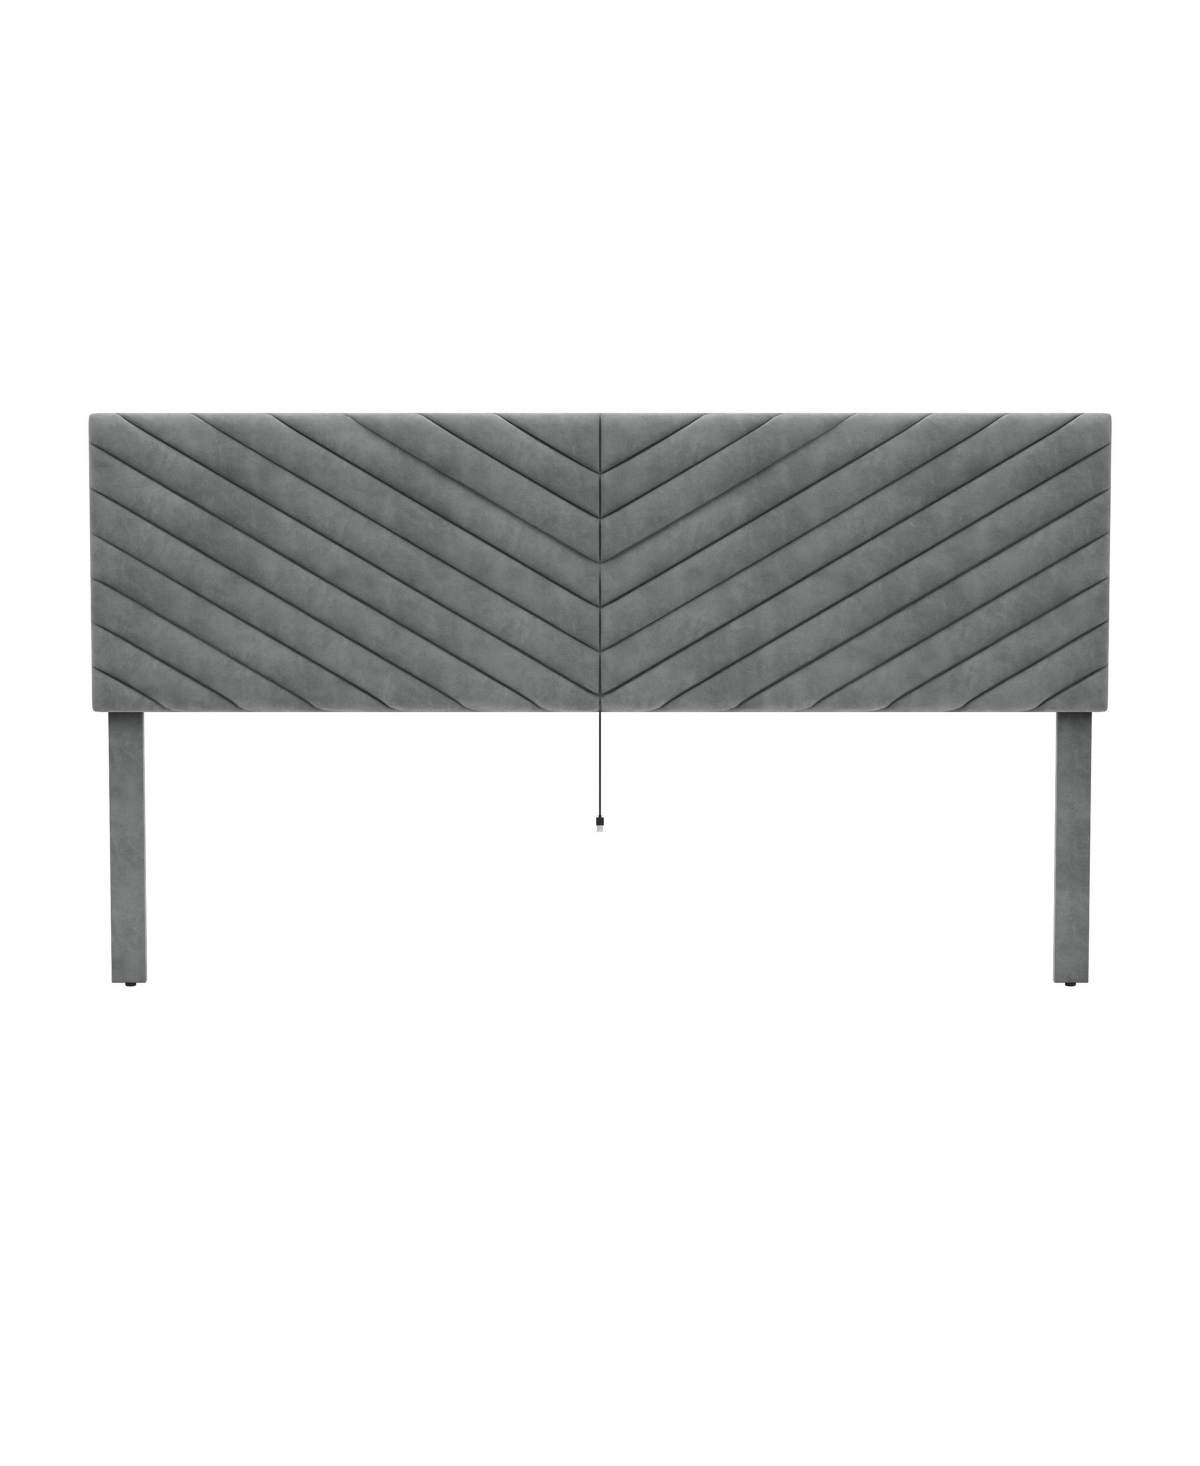 Hillsdale 50" 100% Polyester Crestwood Upholstered Furniture Chevron Pleated King Headboard With Usb Ports In Gray